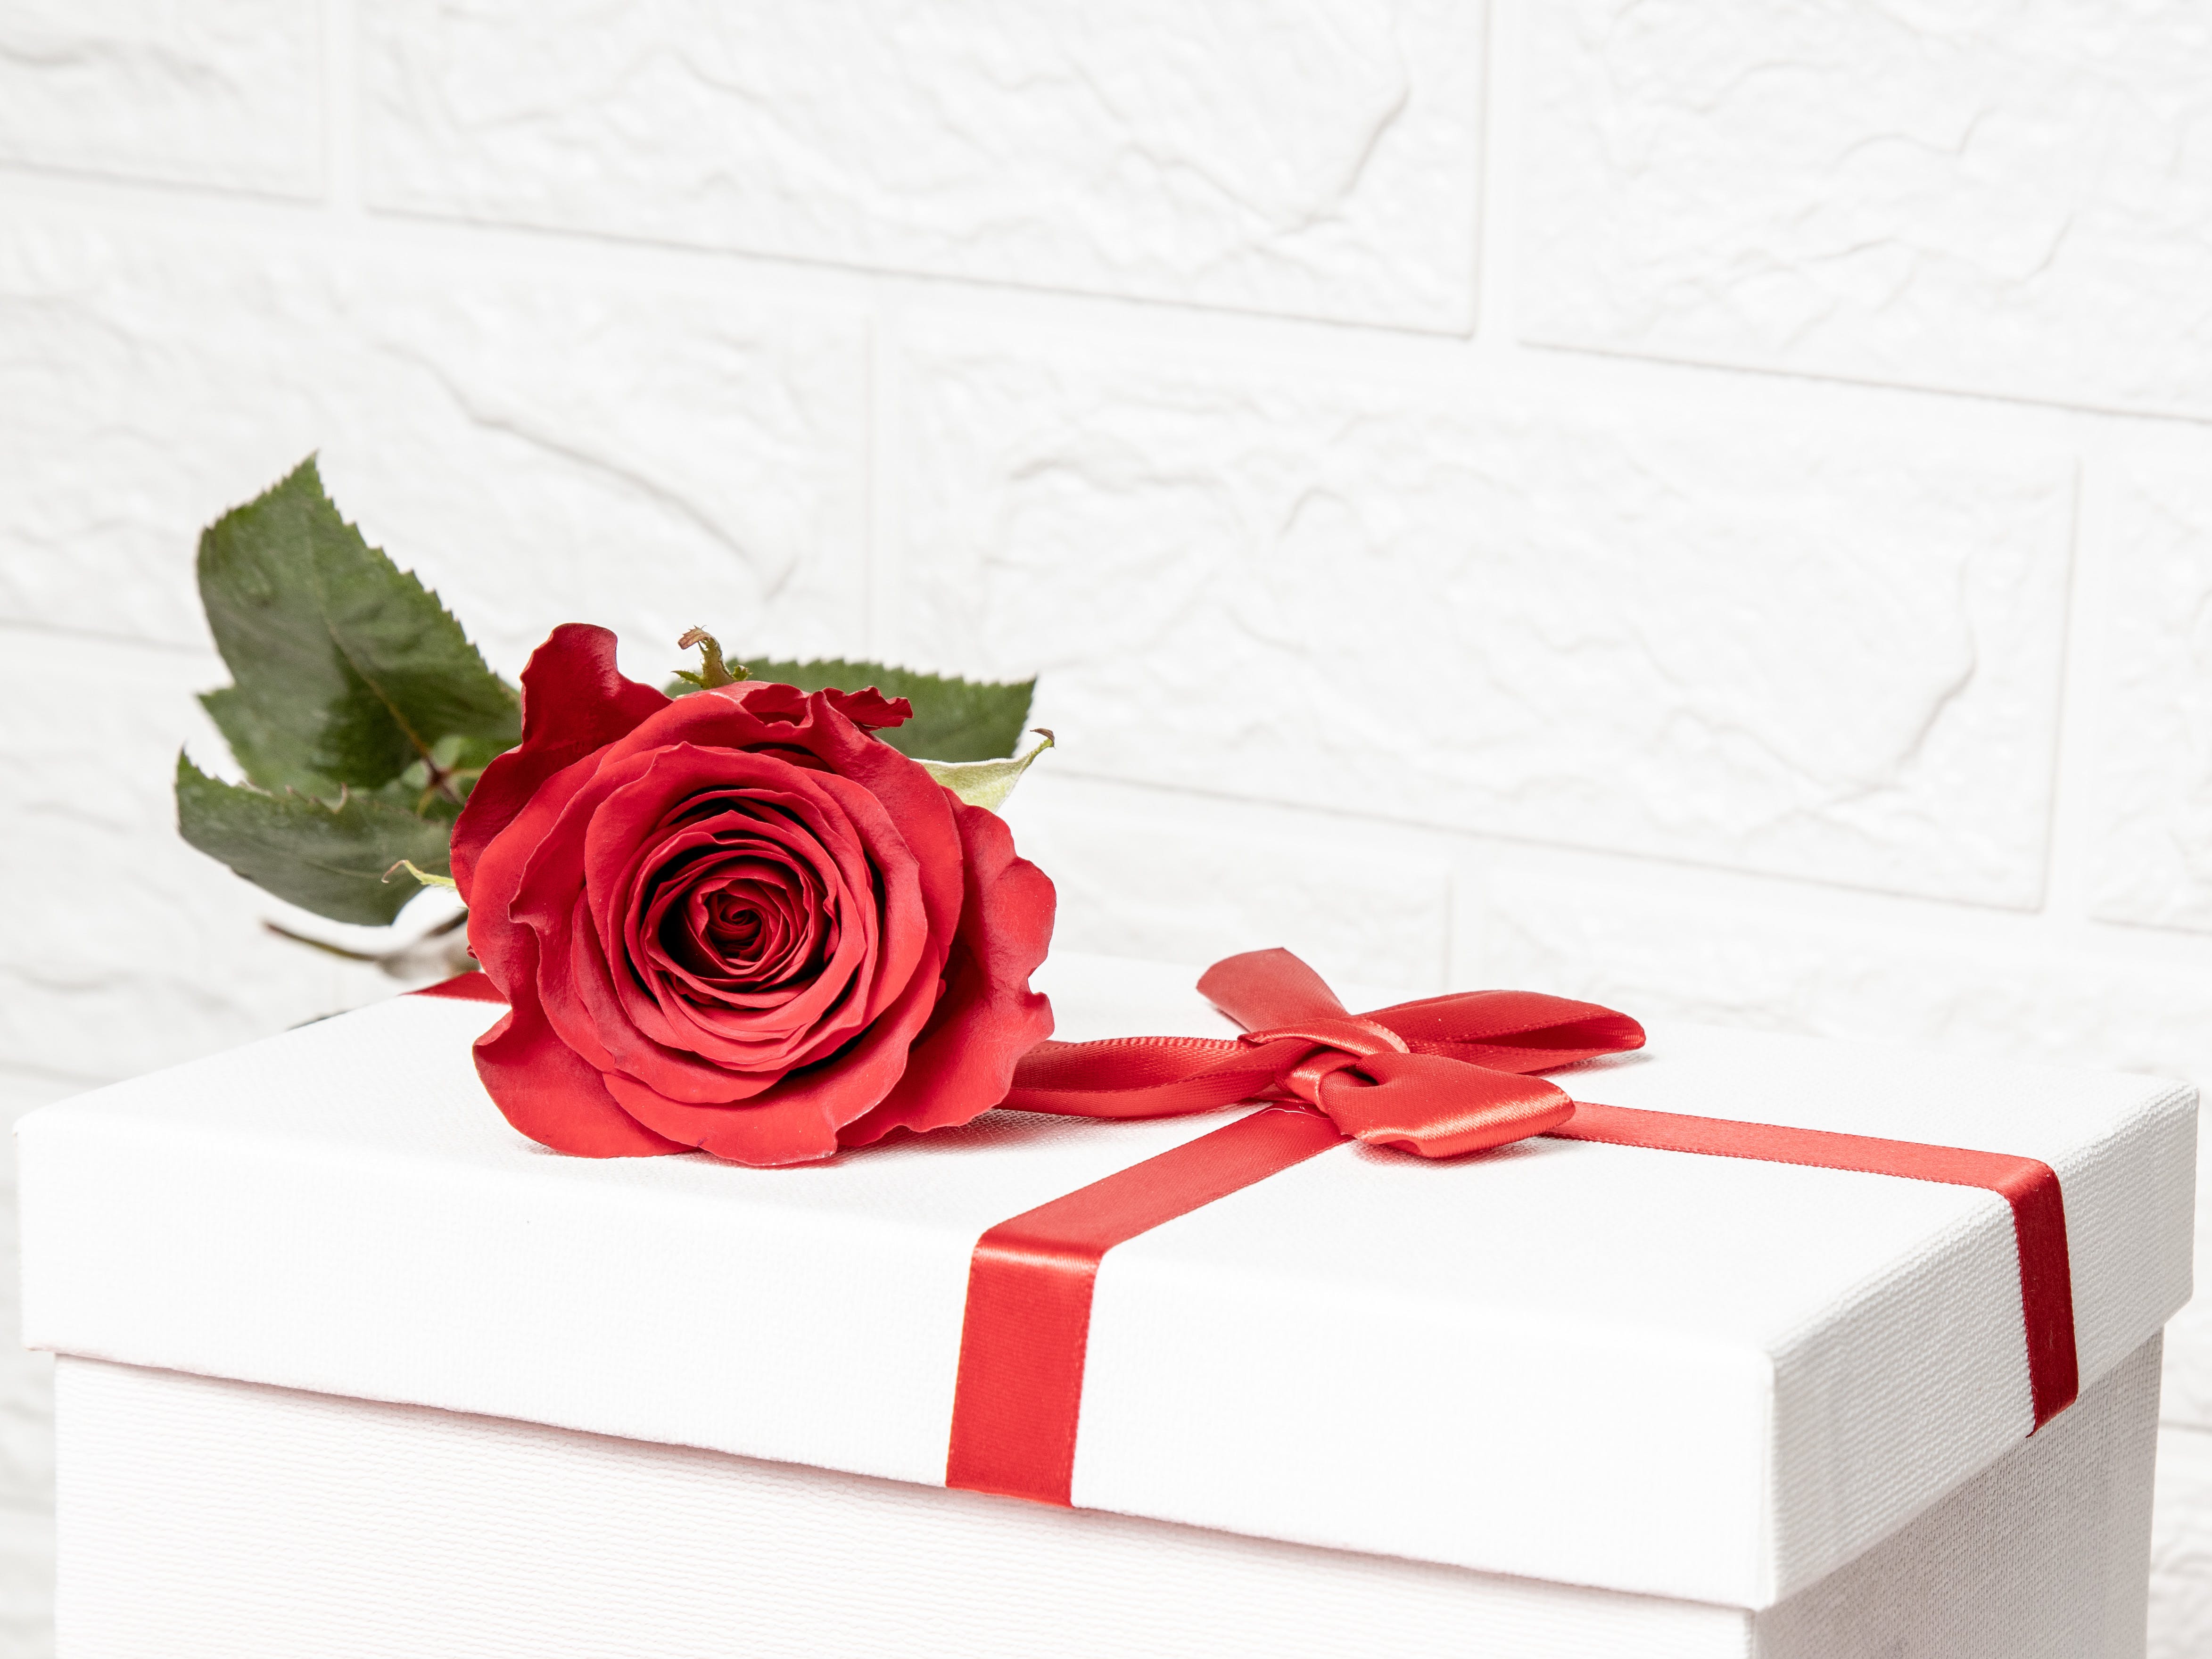 Gifts of Love: Treat Yourself or Your Loved Ones to Our Valentine's Day Collection